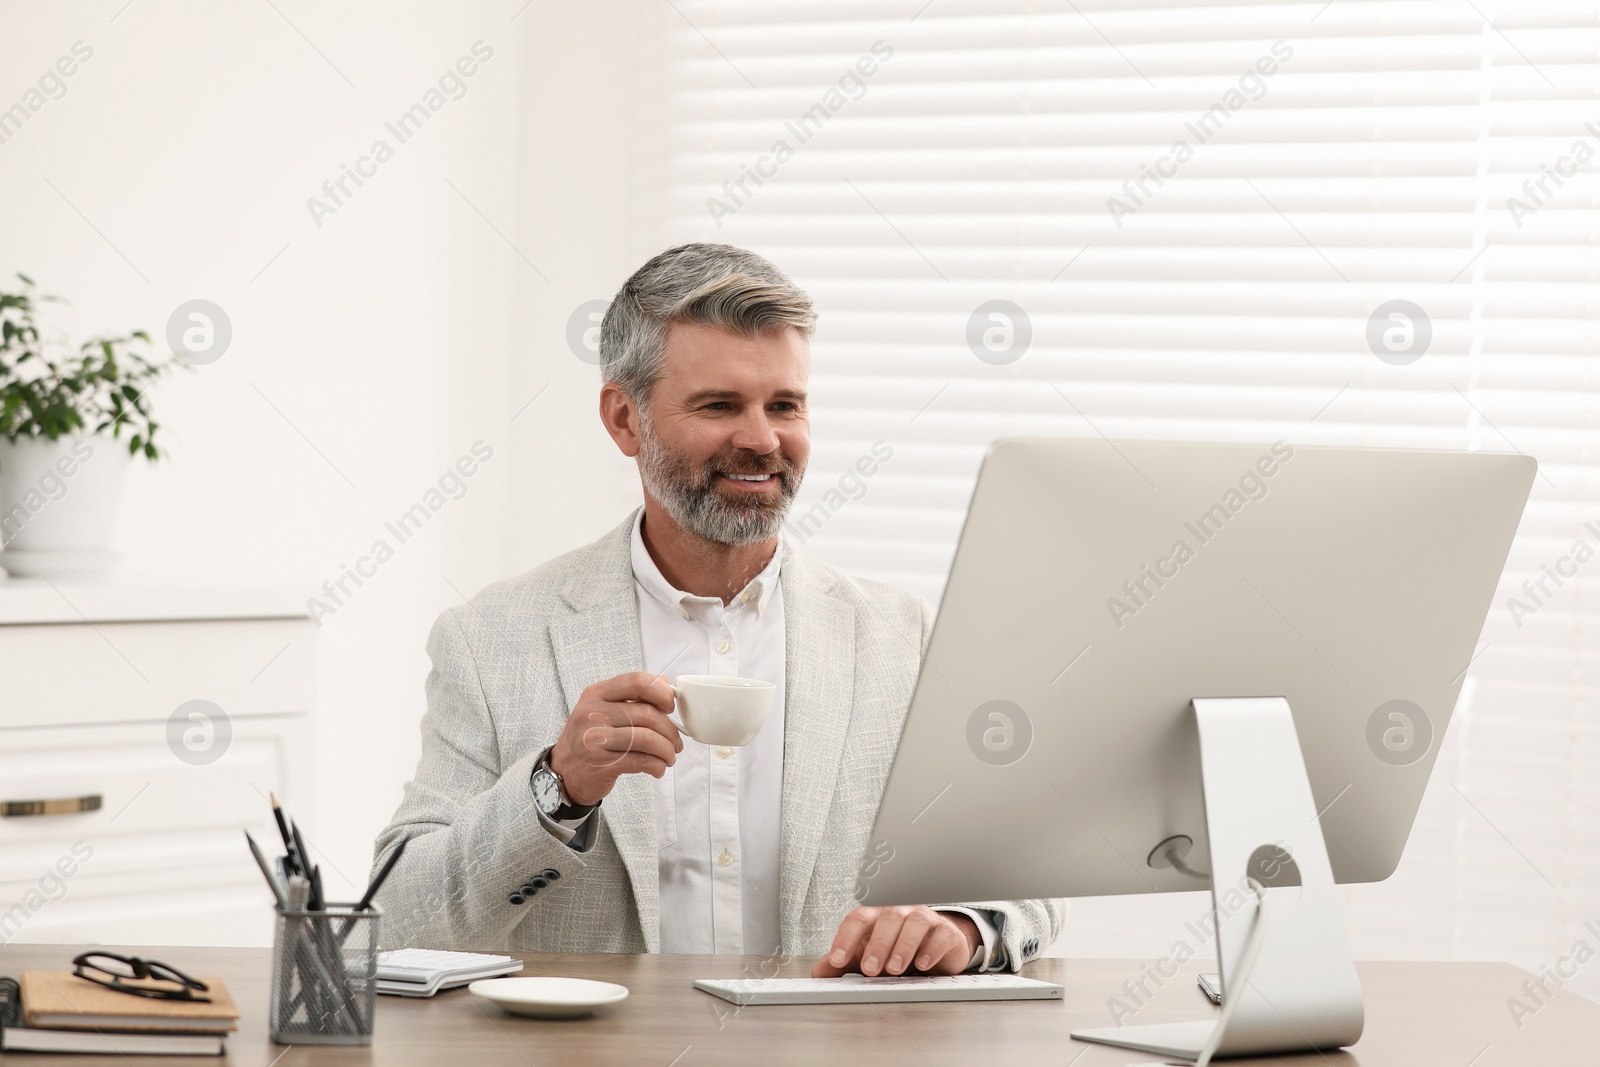 Photo of Professional accountant with cup of coffee working at wooden desk in office